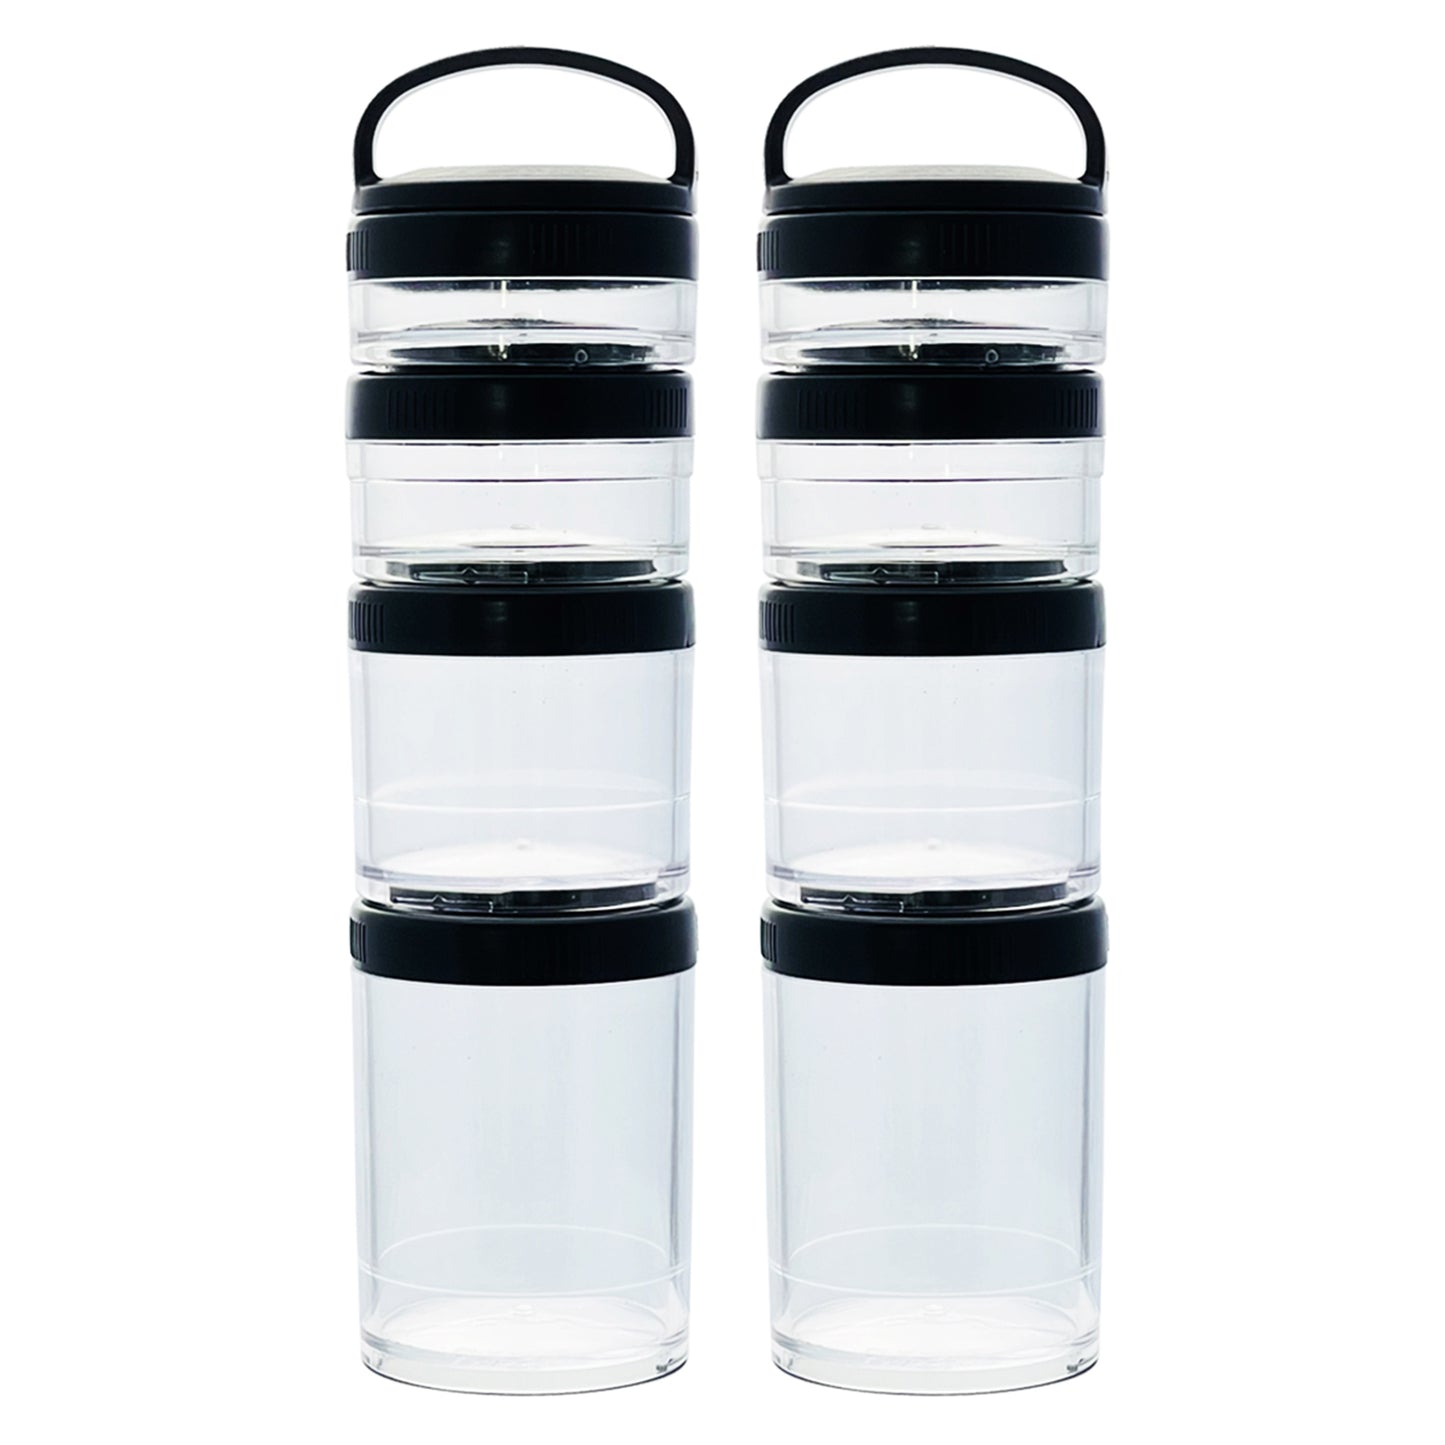 TWO PACK Go-Snack Organizers